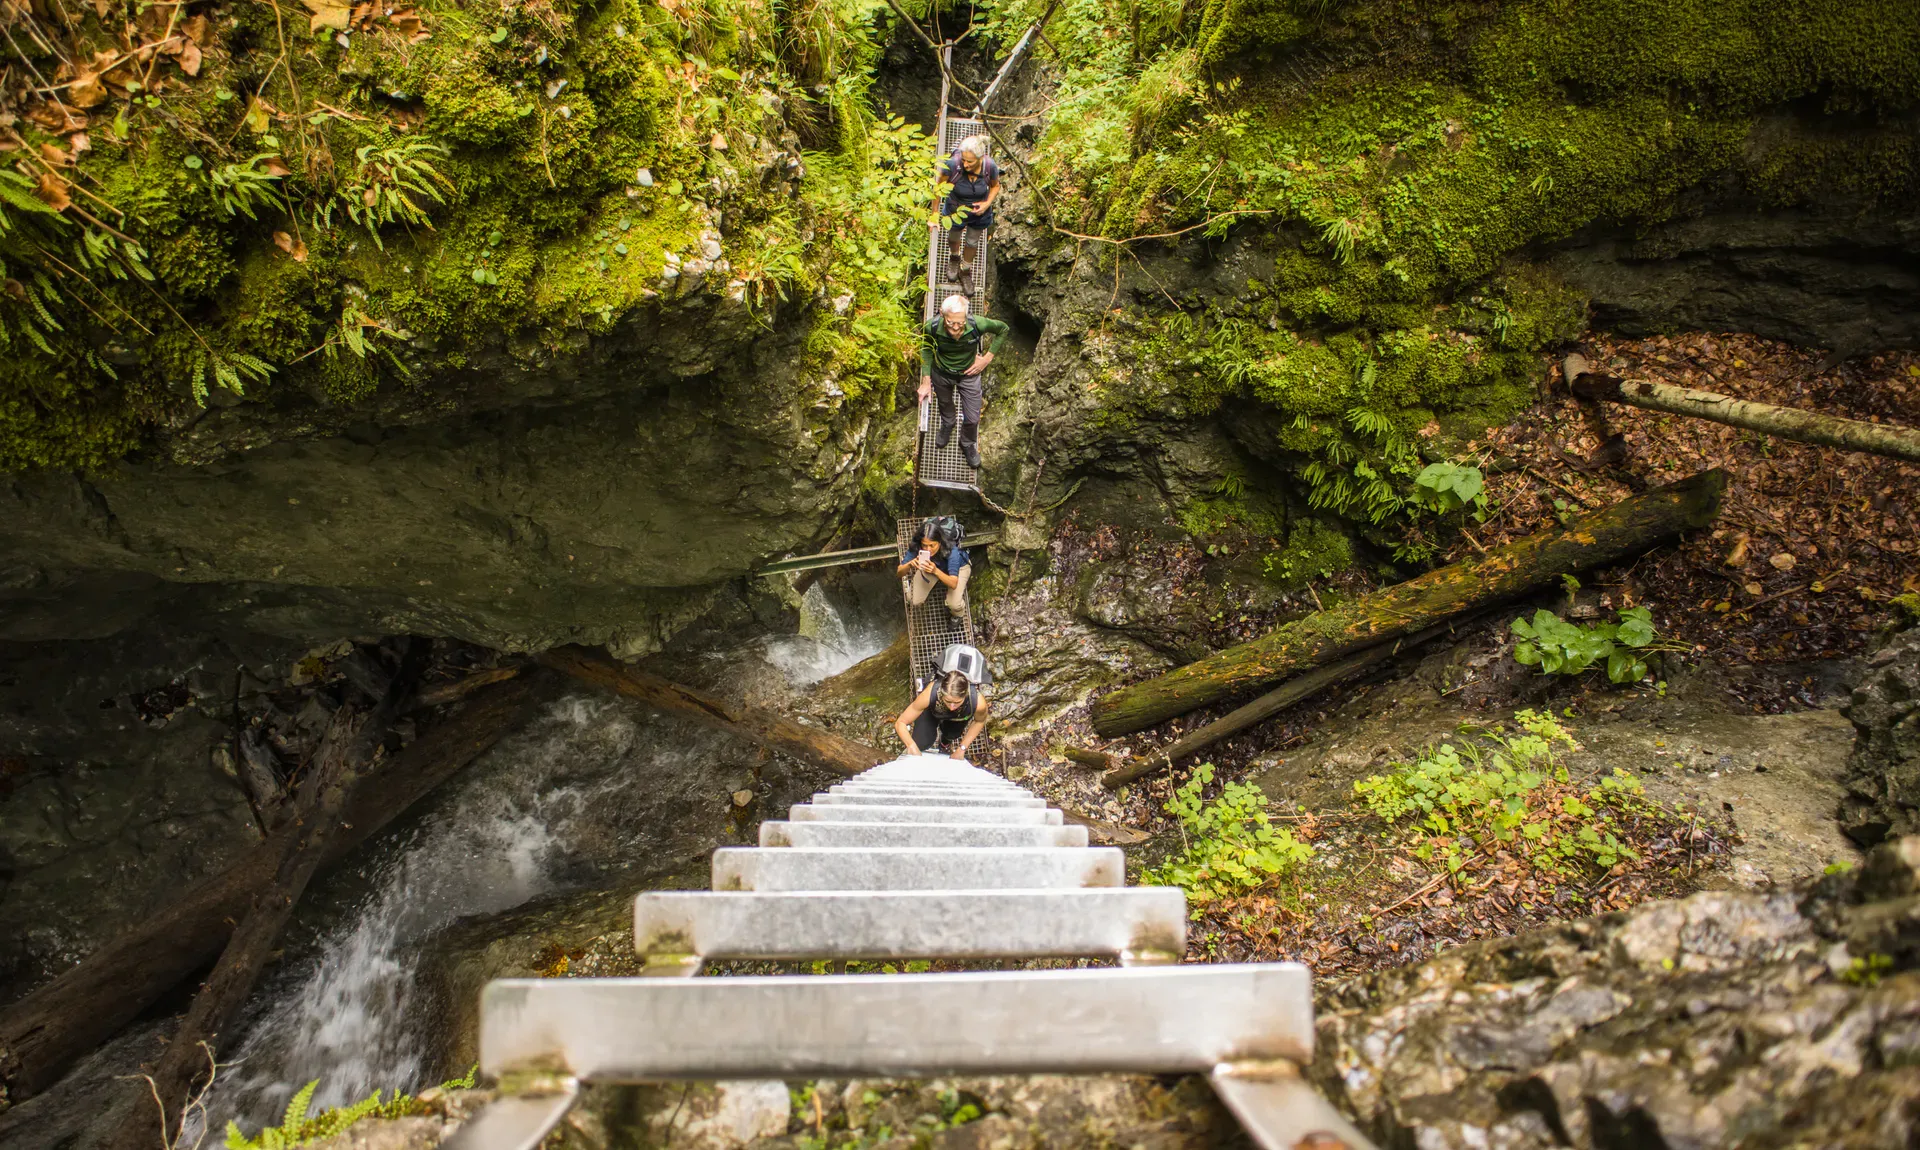 Adventurous hikers at the bottom of a ladder in a gorge